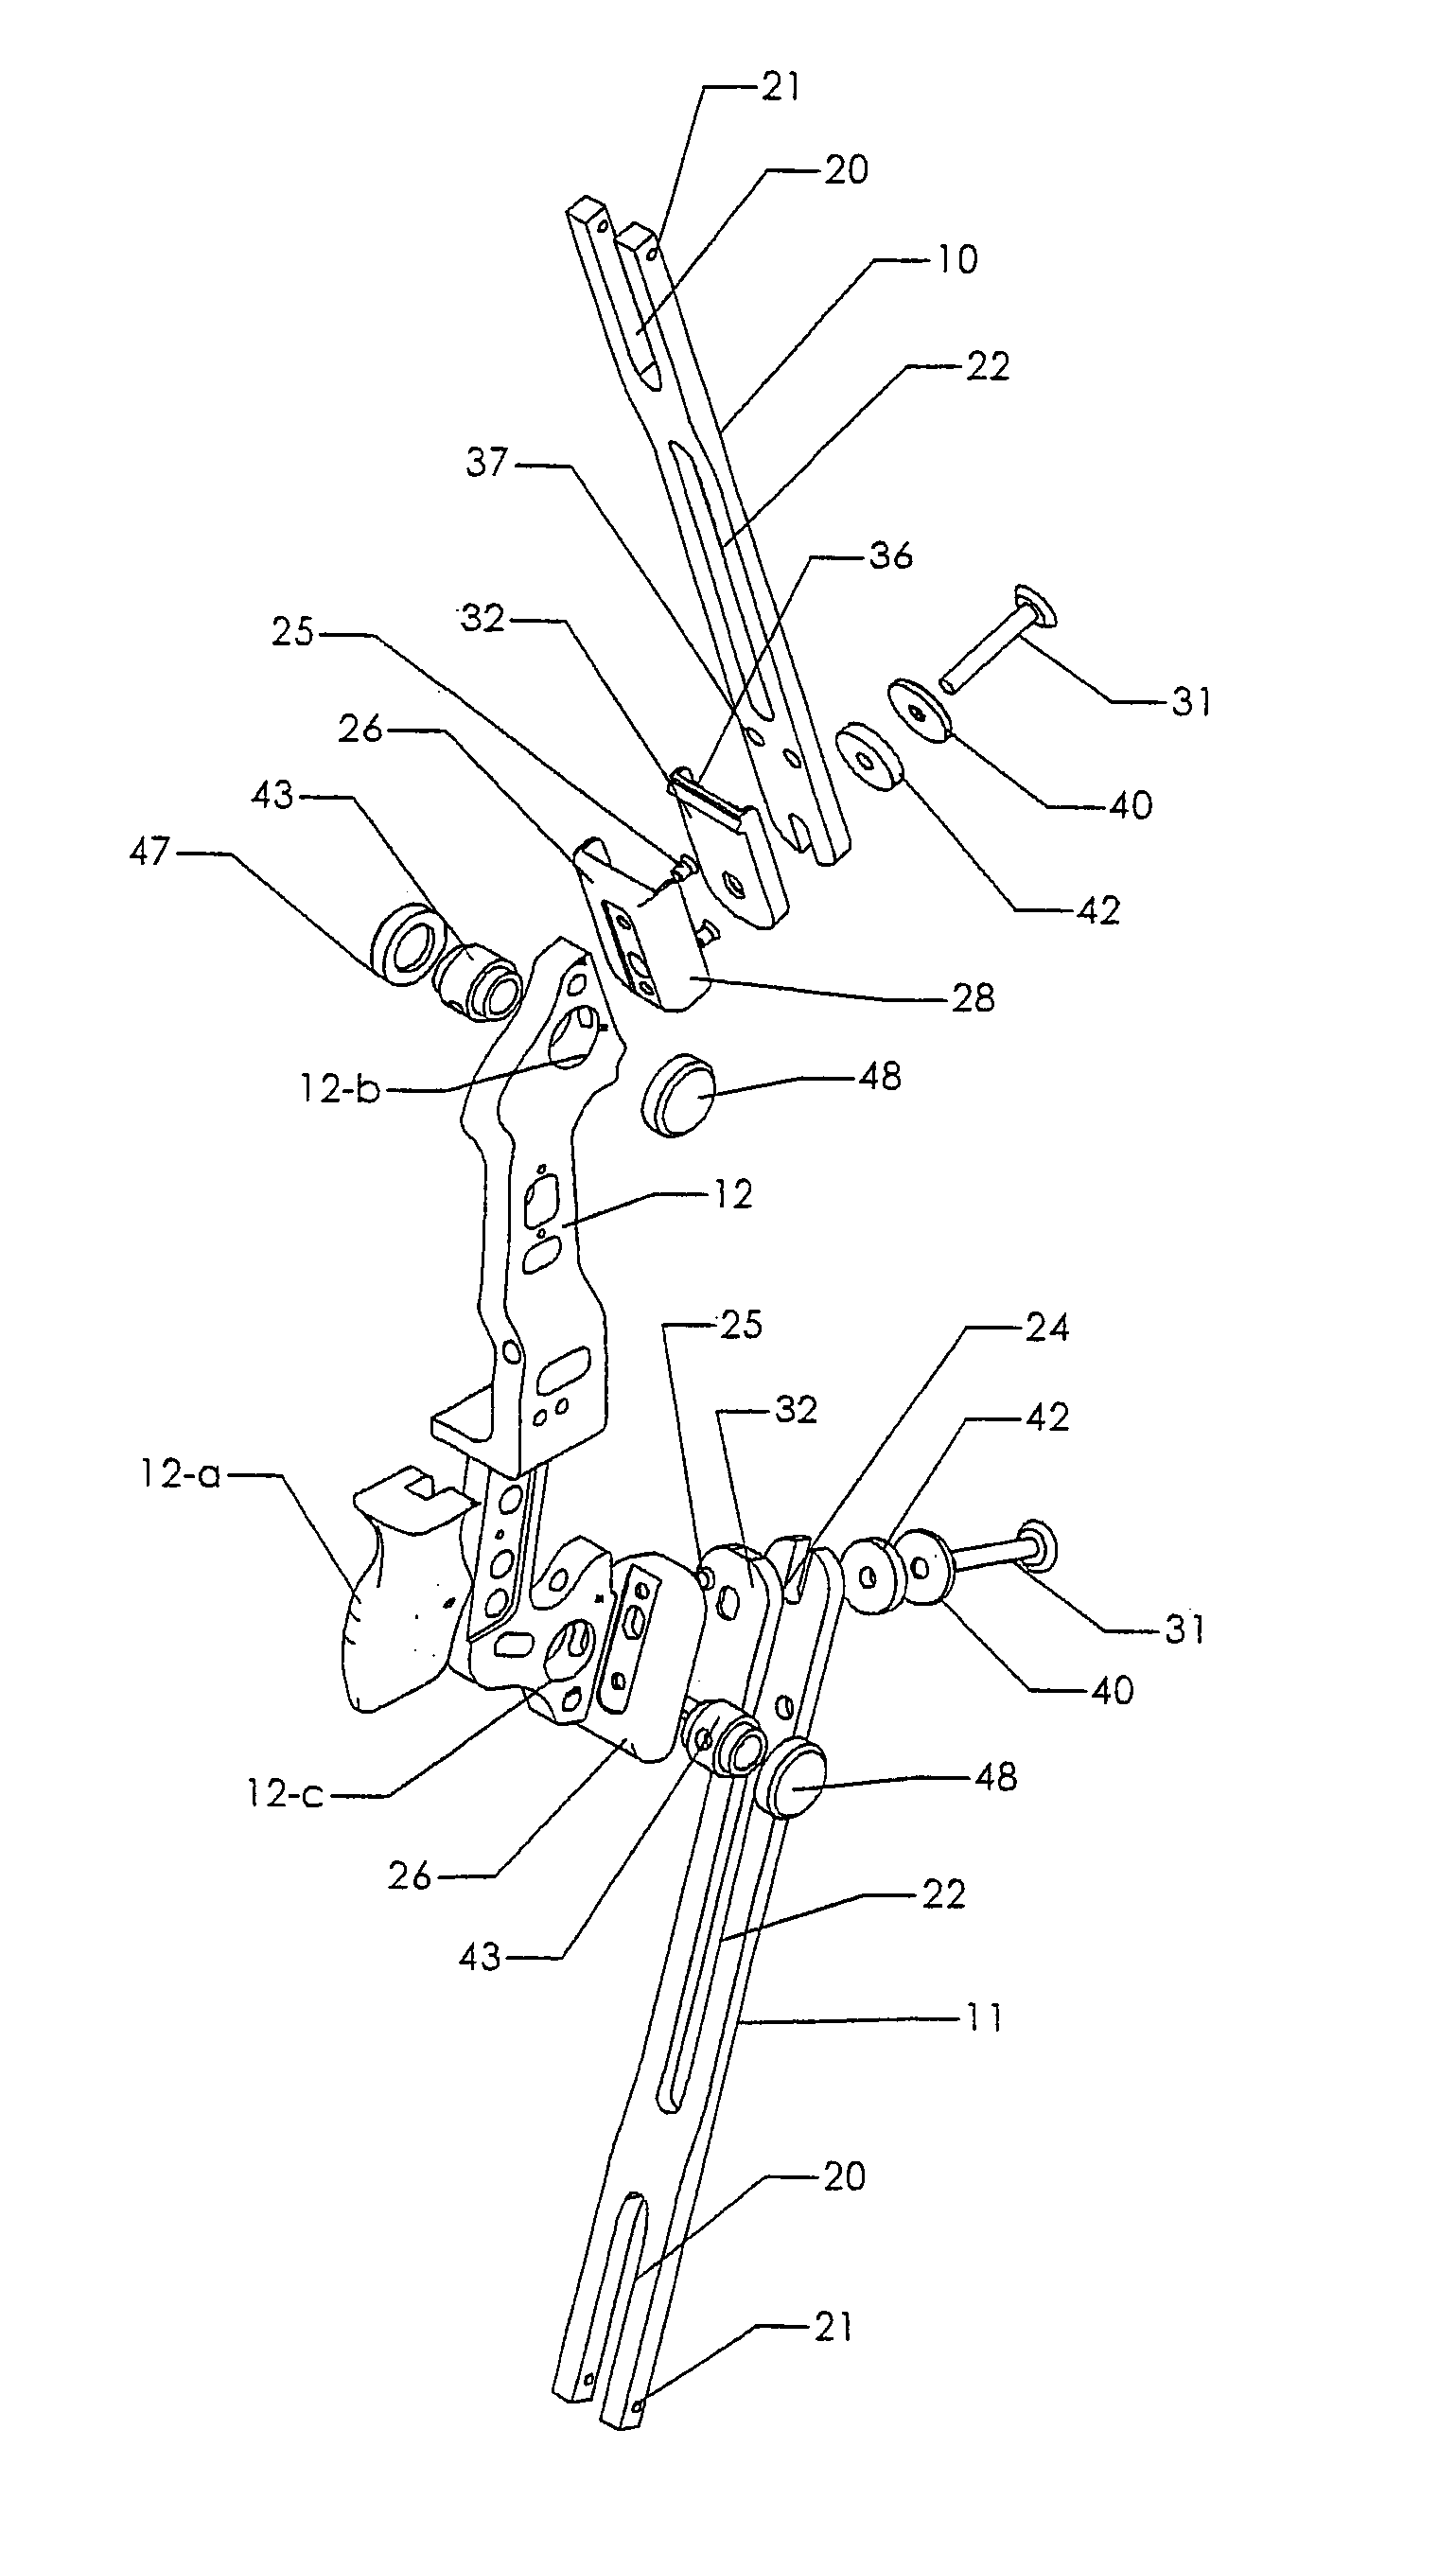 Compound archery bow construction and methods of making and operating the bow